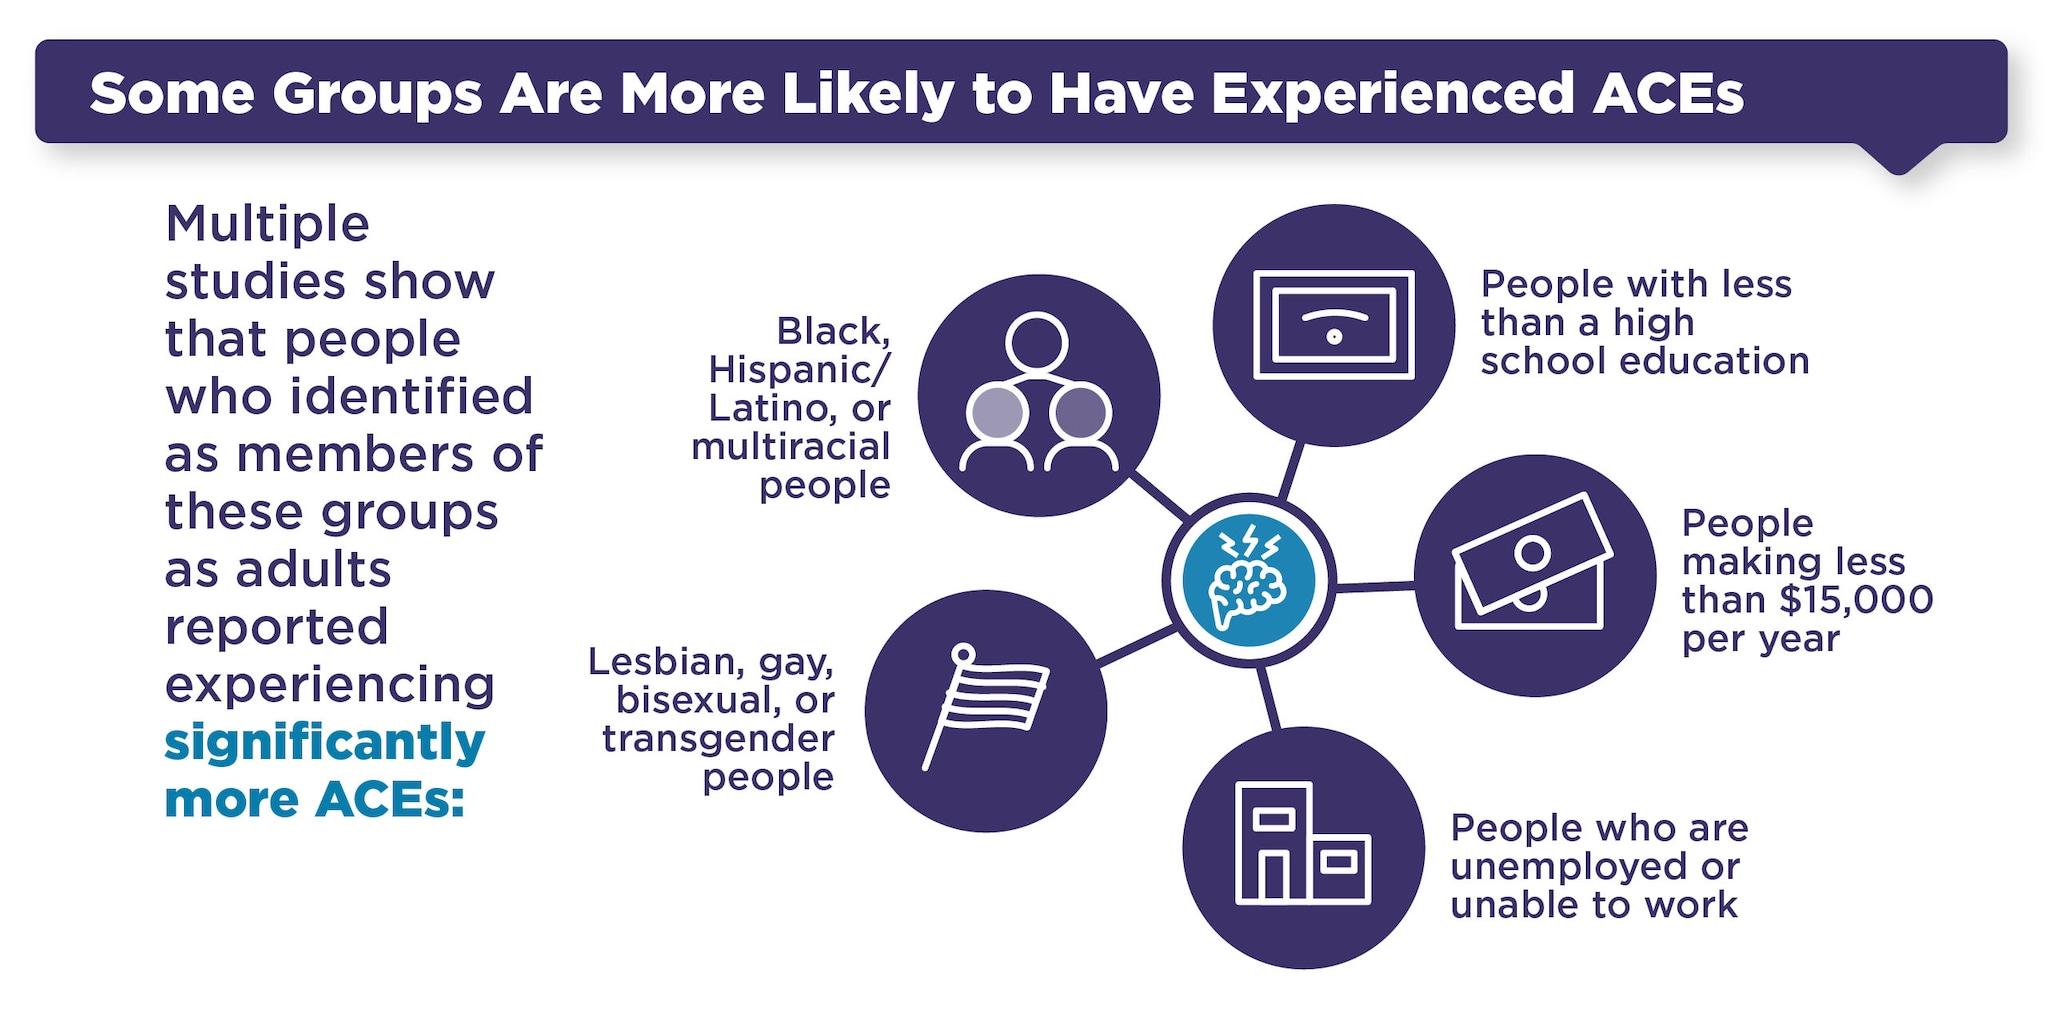 Some groups are more likely to have experienced ACEs, including: Black, Hispanic/Latino, or multiracial people; people with less than a high school education; people making less than $15,000 a year; people who are unemployed or unable to work; and lesbian, gay, bisexual, or transgender people.